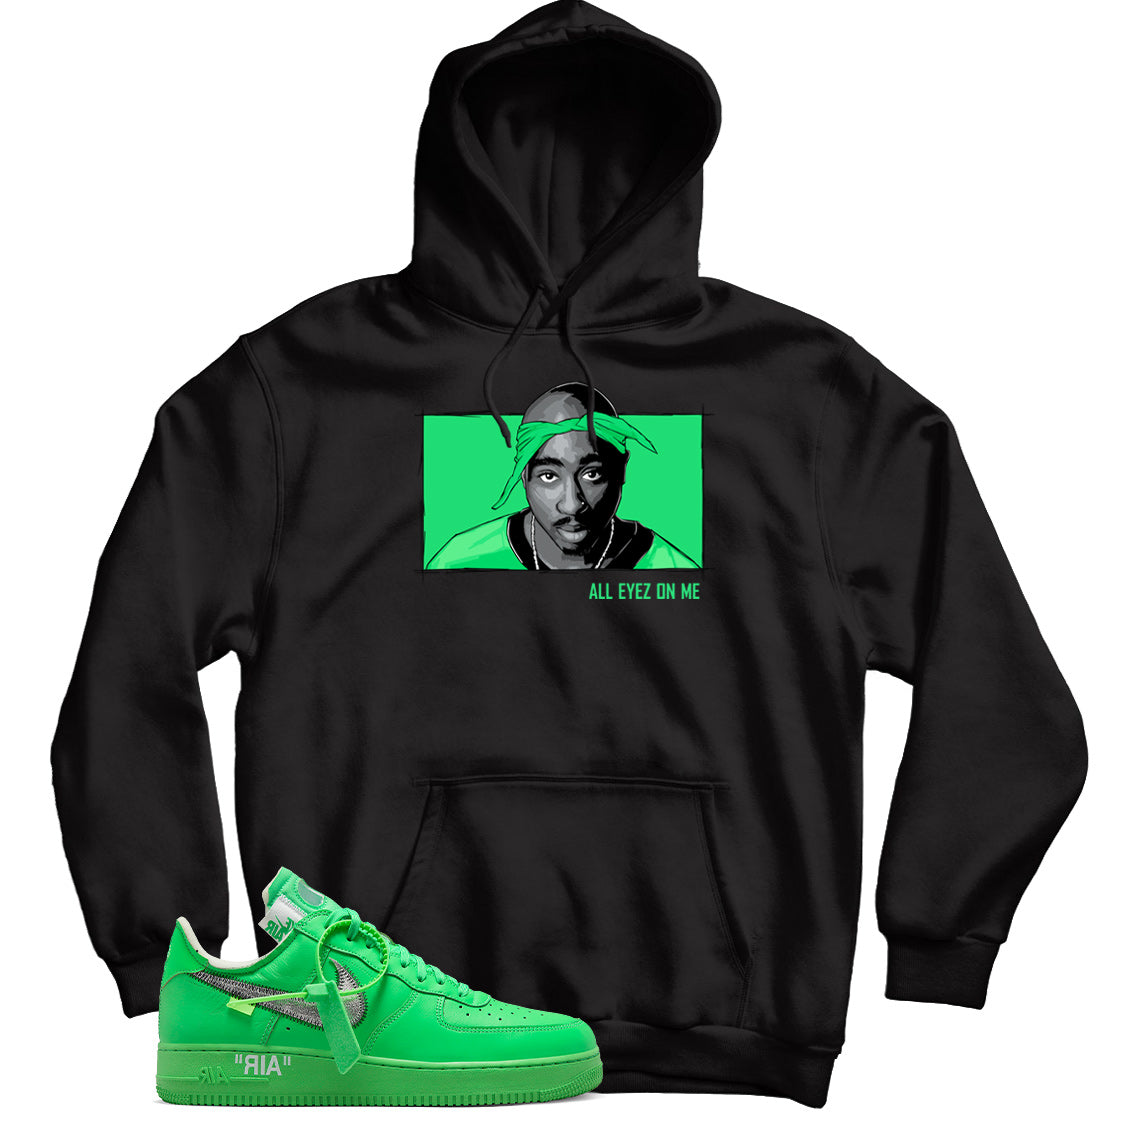 Off-White x Nike Air Force 1 Low Green Spark hoodie